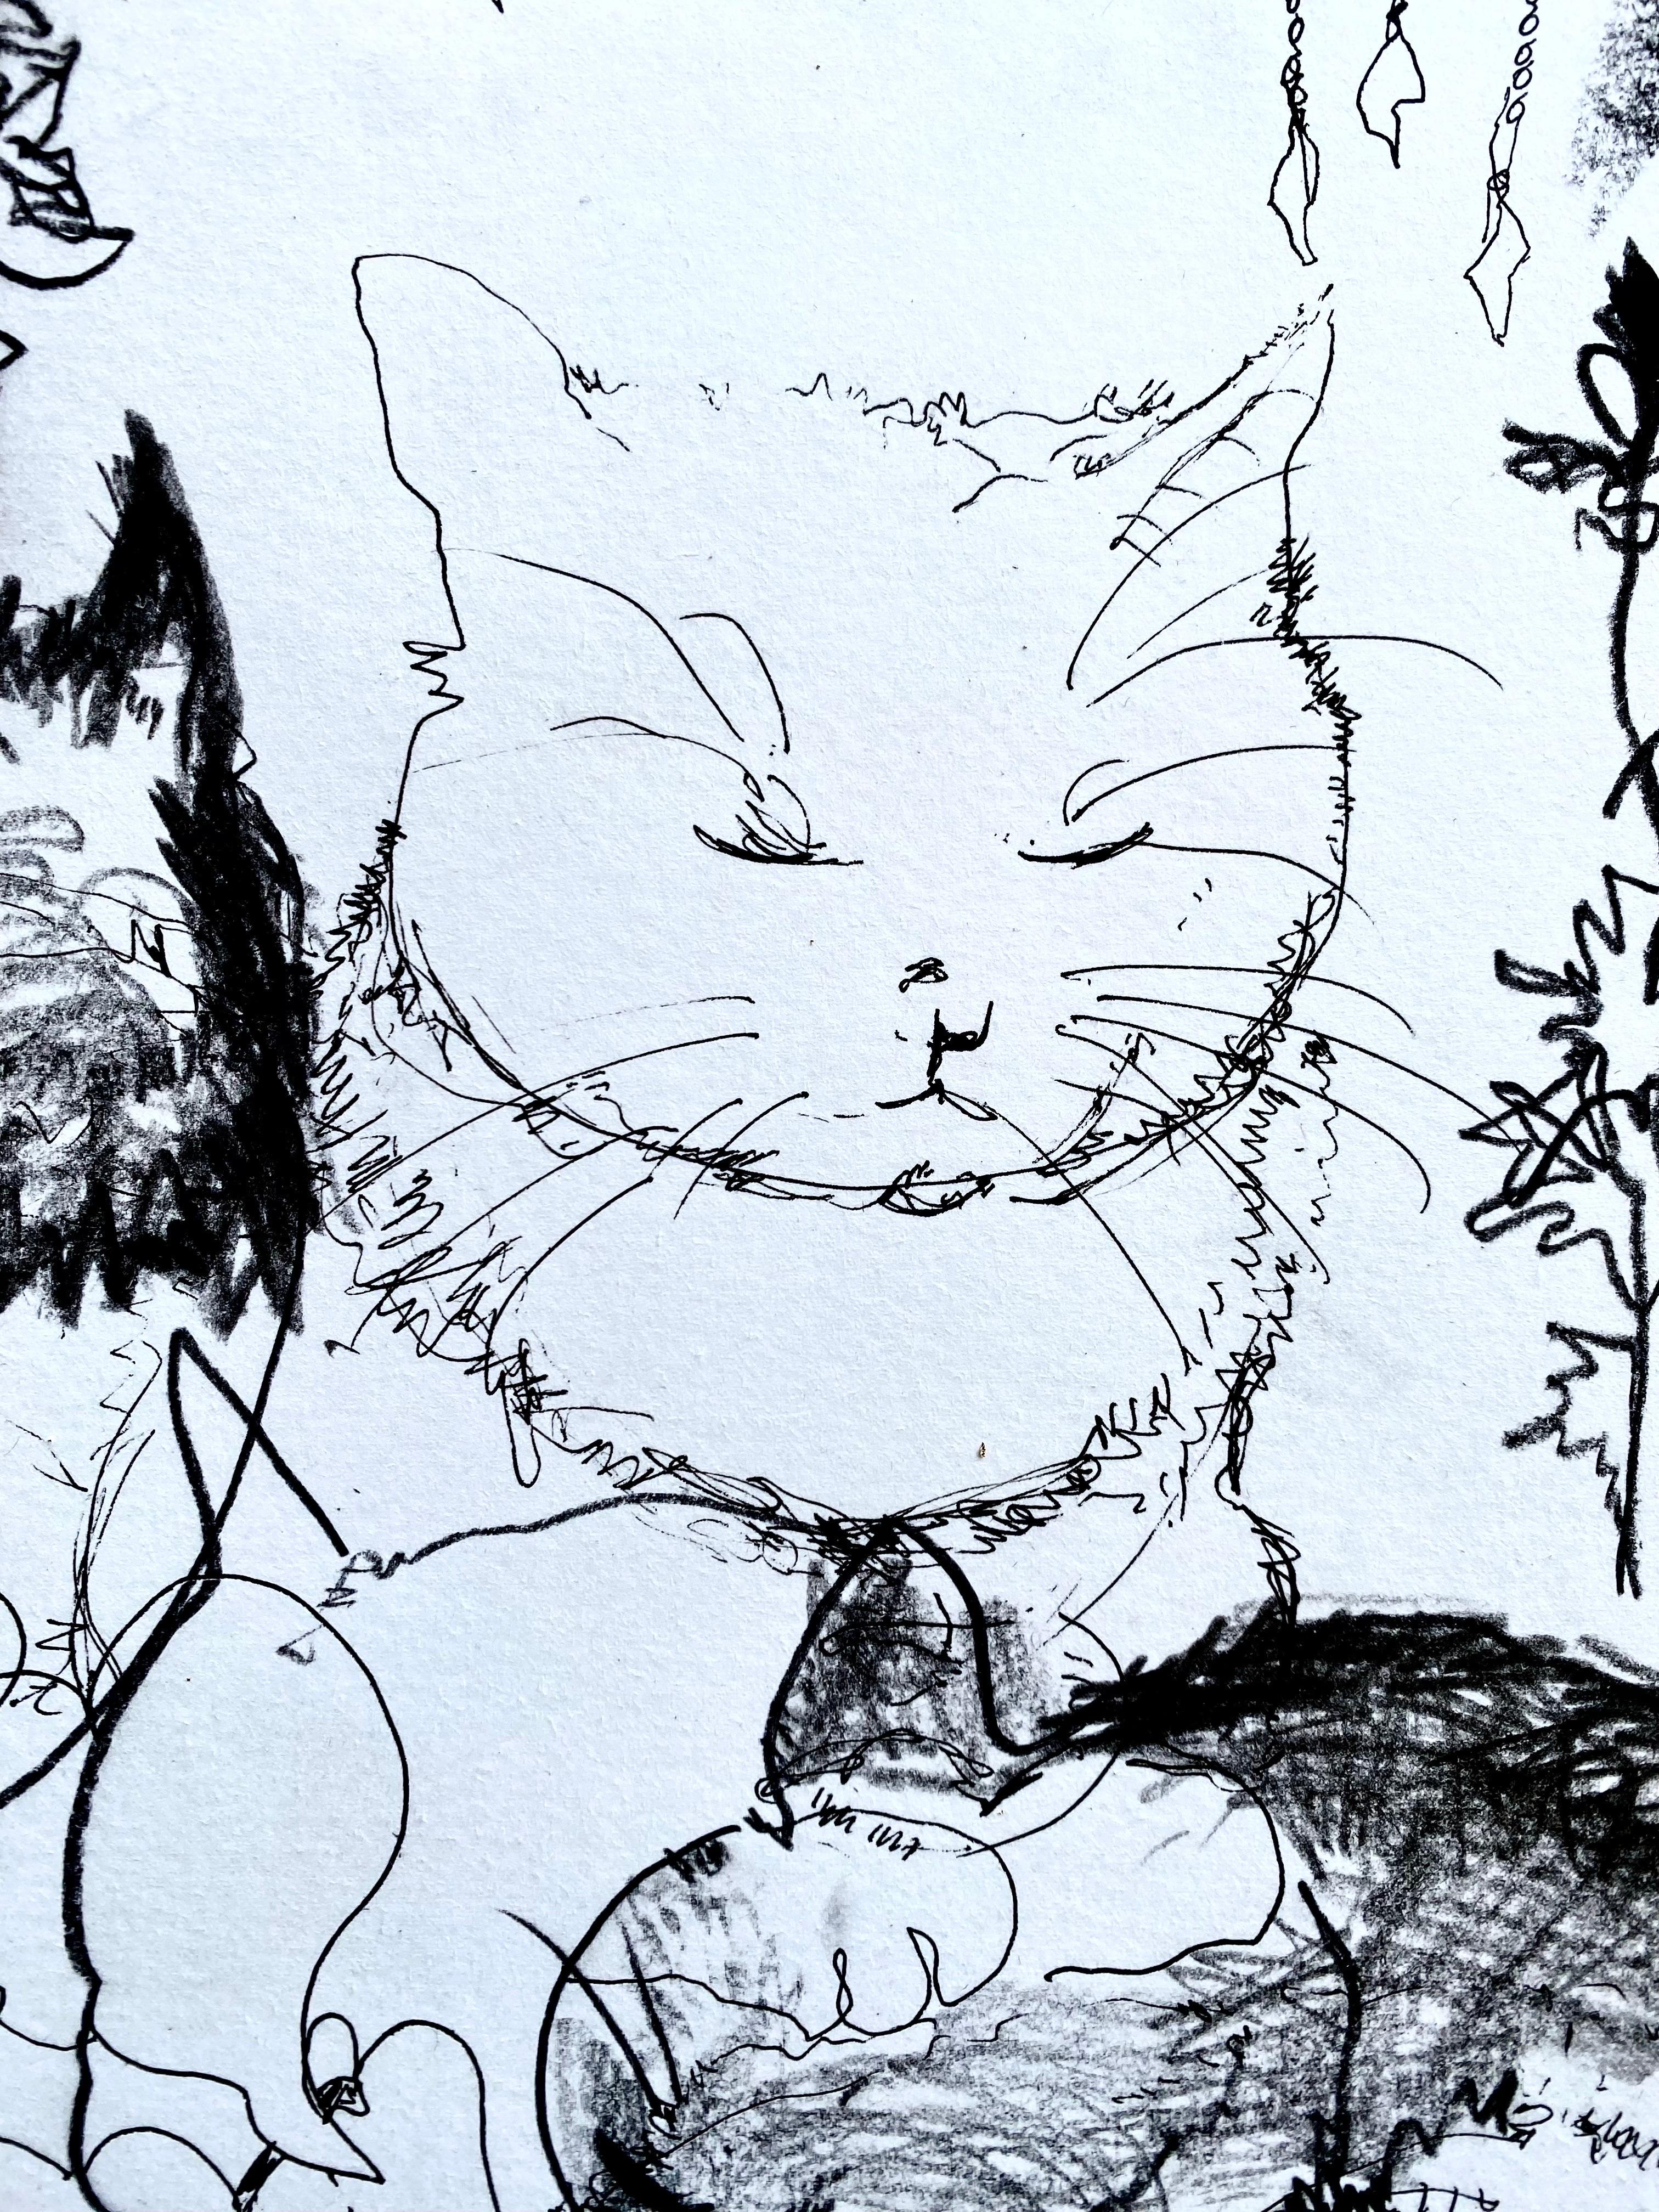 Drawings are the most intimate works of Shizico Yi, therefore it is rare to have few only coming to the market and be available. 
This is a drawing study of her cat in the garden over the few days, the nature of a cat constantly on the move made a